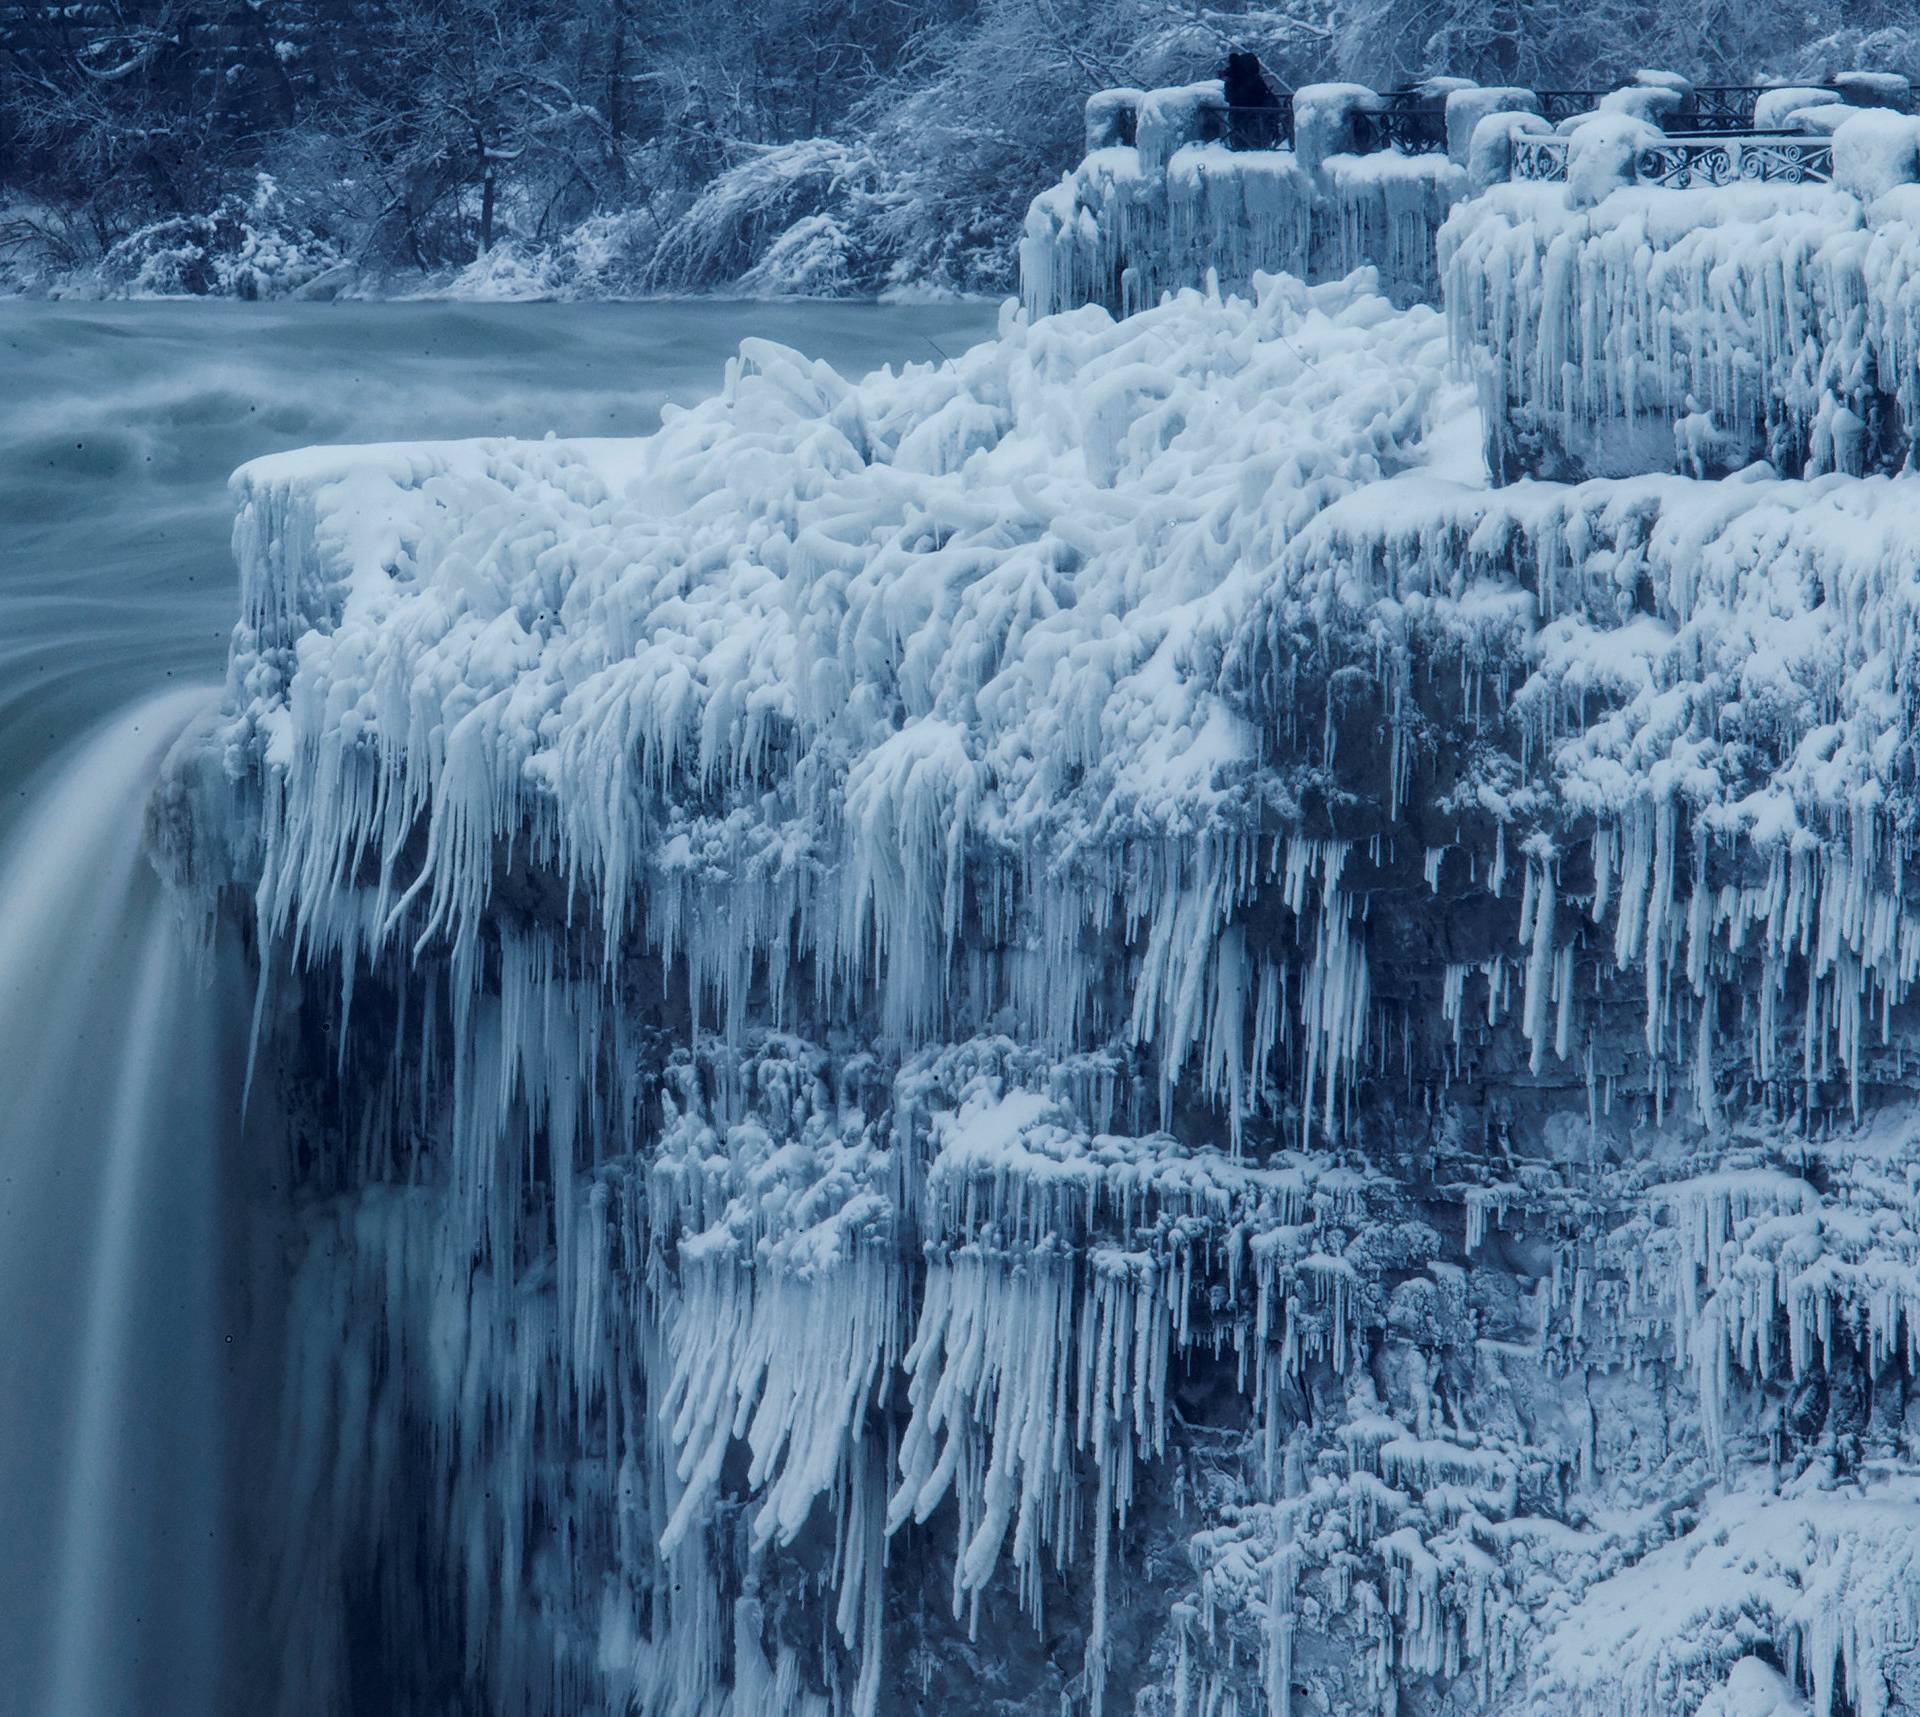 A lone visitor takes a picture near the brink of the ice covered Horseshoe Falls in Niagara Falls